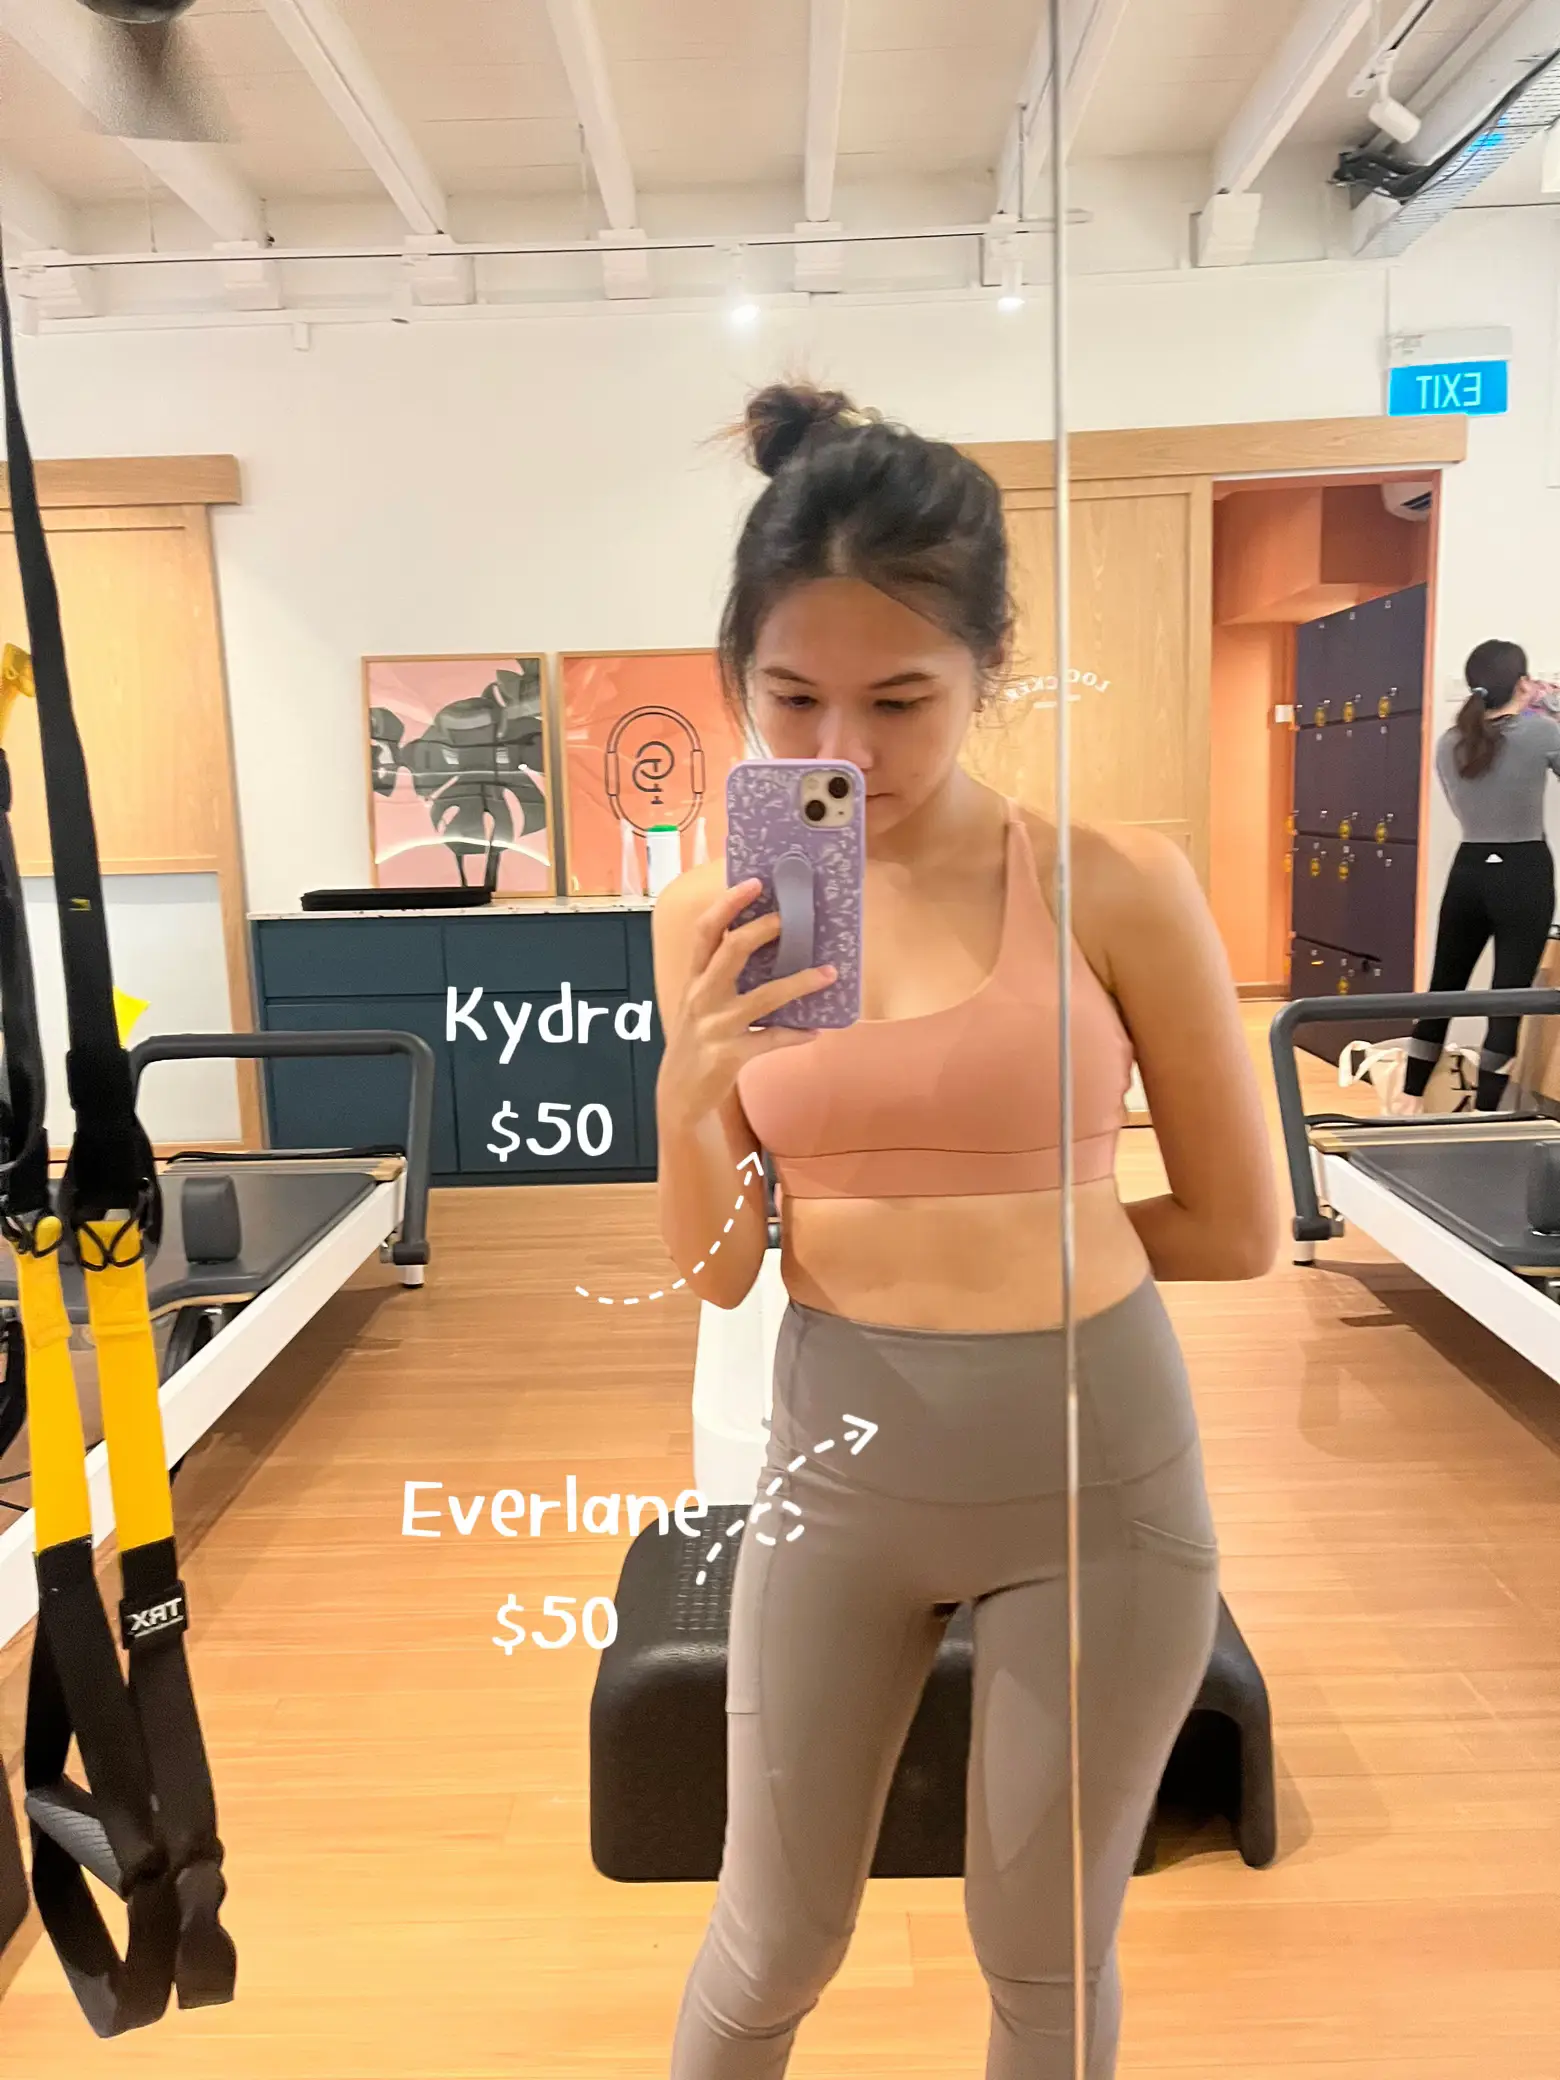 Budget vs Bougie Activewear, Worth the $$ 💸?